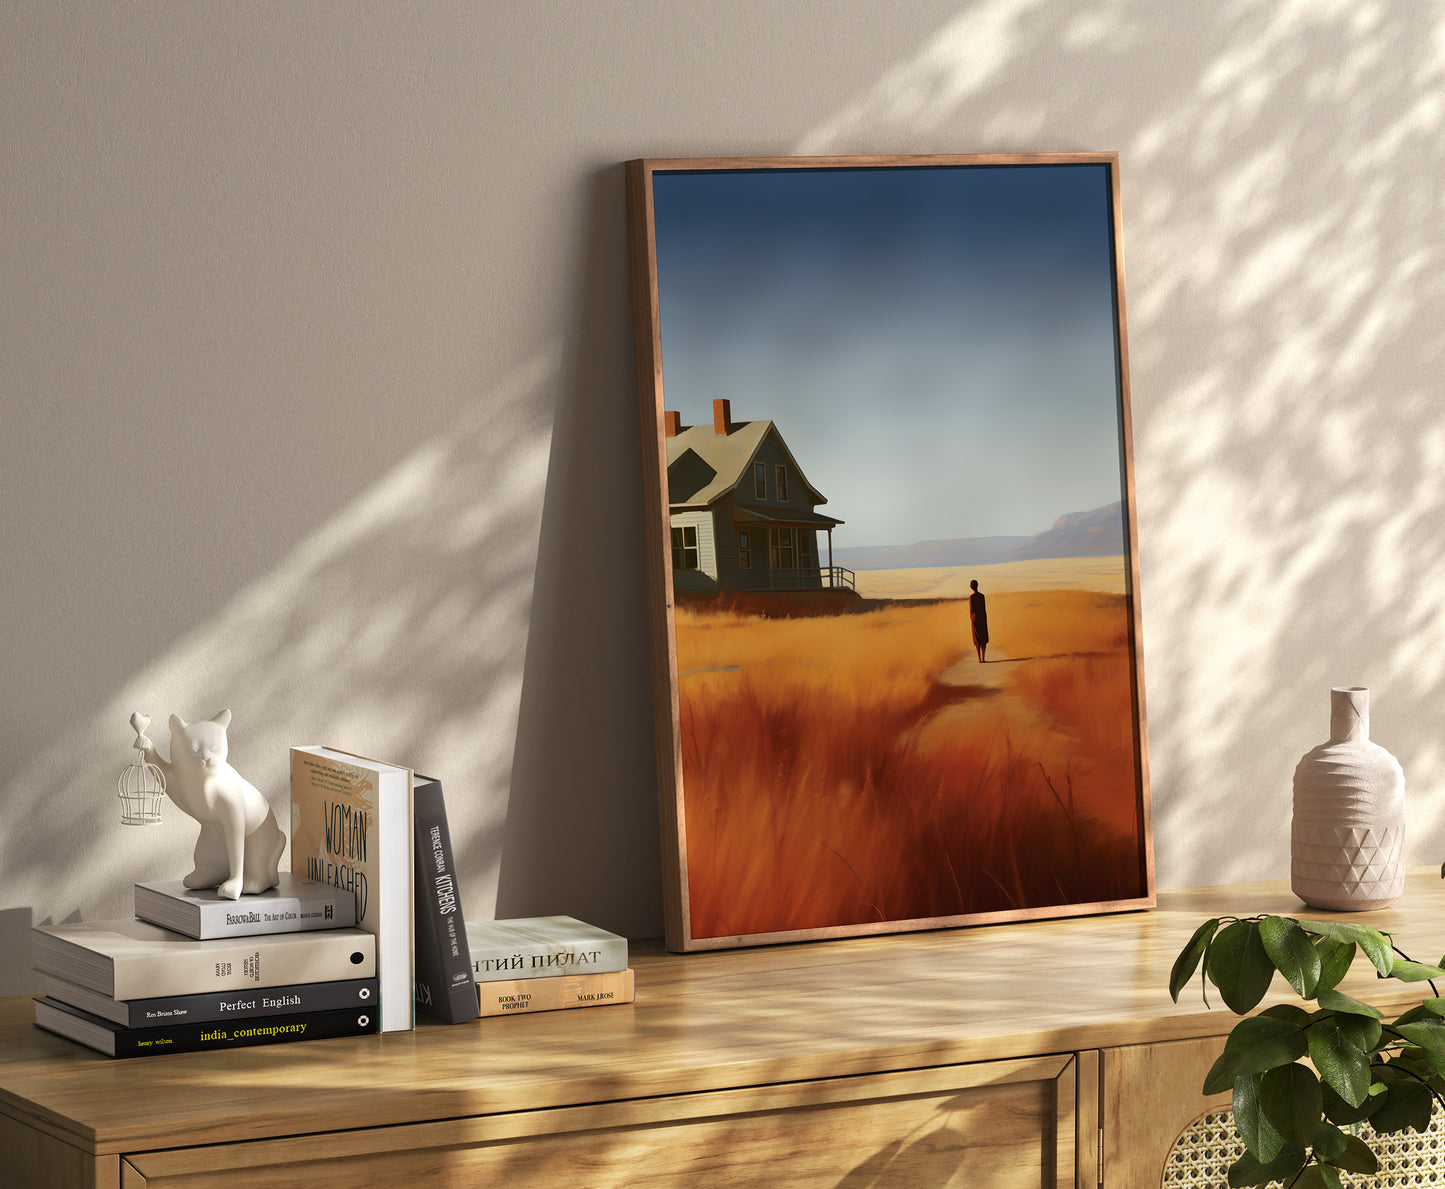 A framed painting of a rural landscape at sunset leaning against a wall beside a shelf with books and decor.